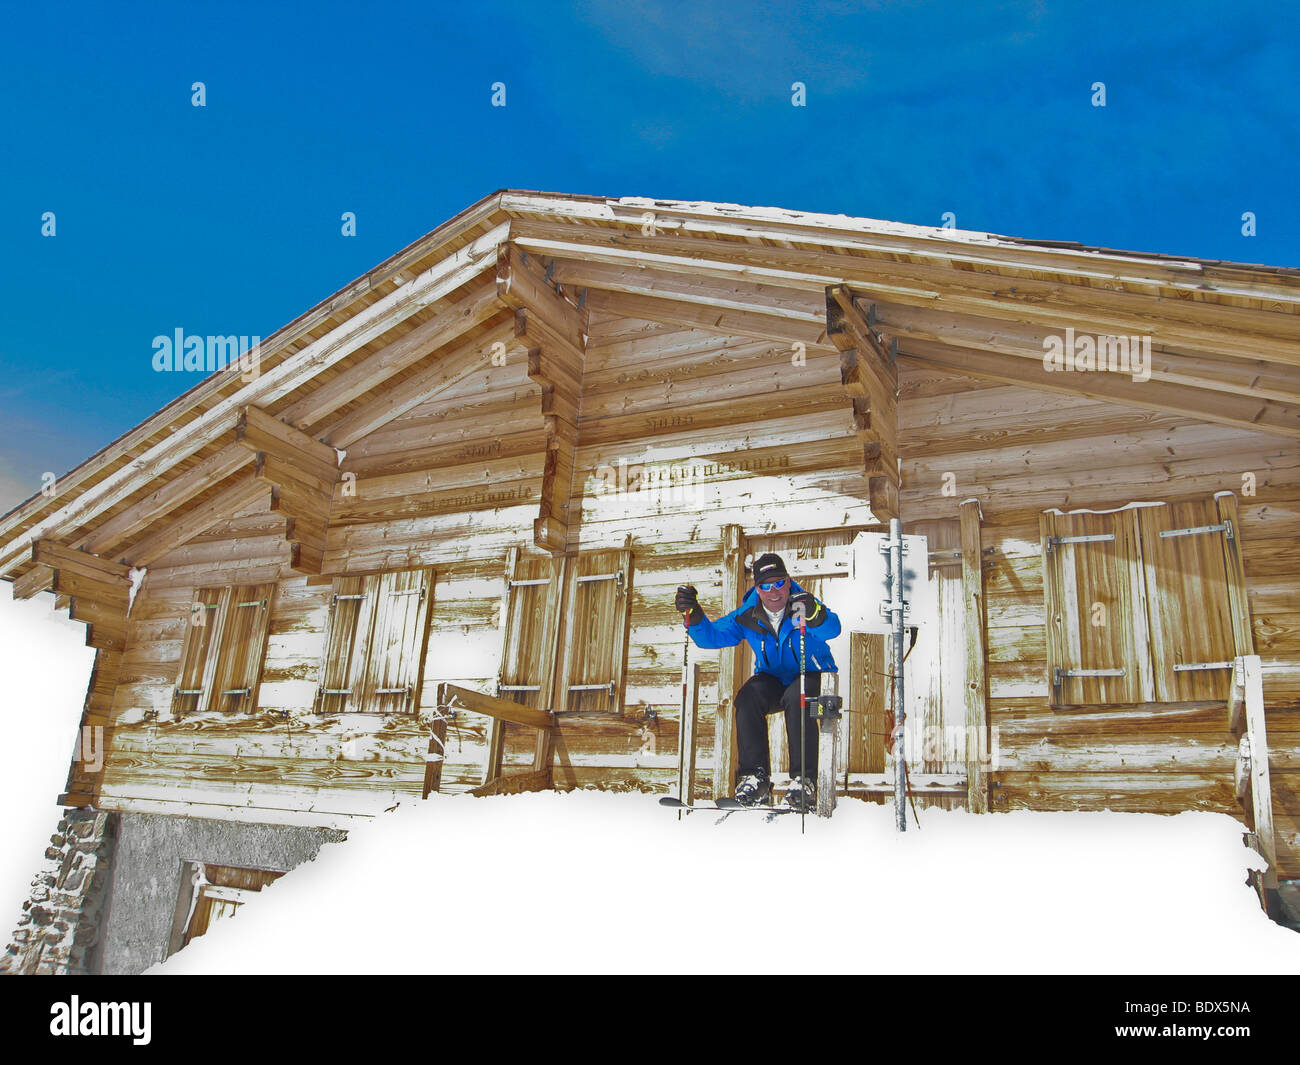 Former ski racer Urs Raber shows his winning form at start house of the Lauberhorn Worldcup Downhill race slope Stock Photo